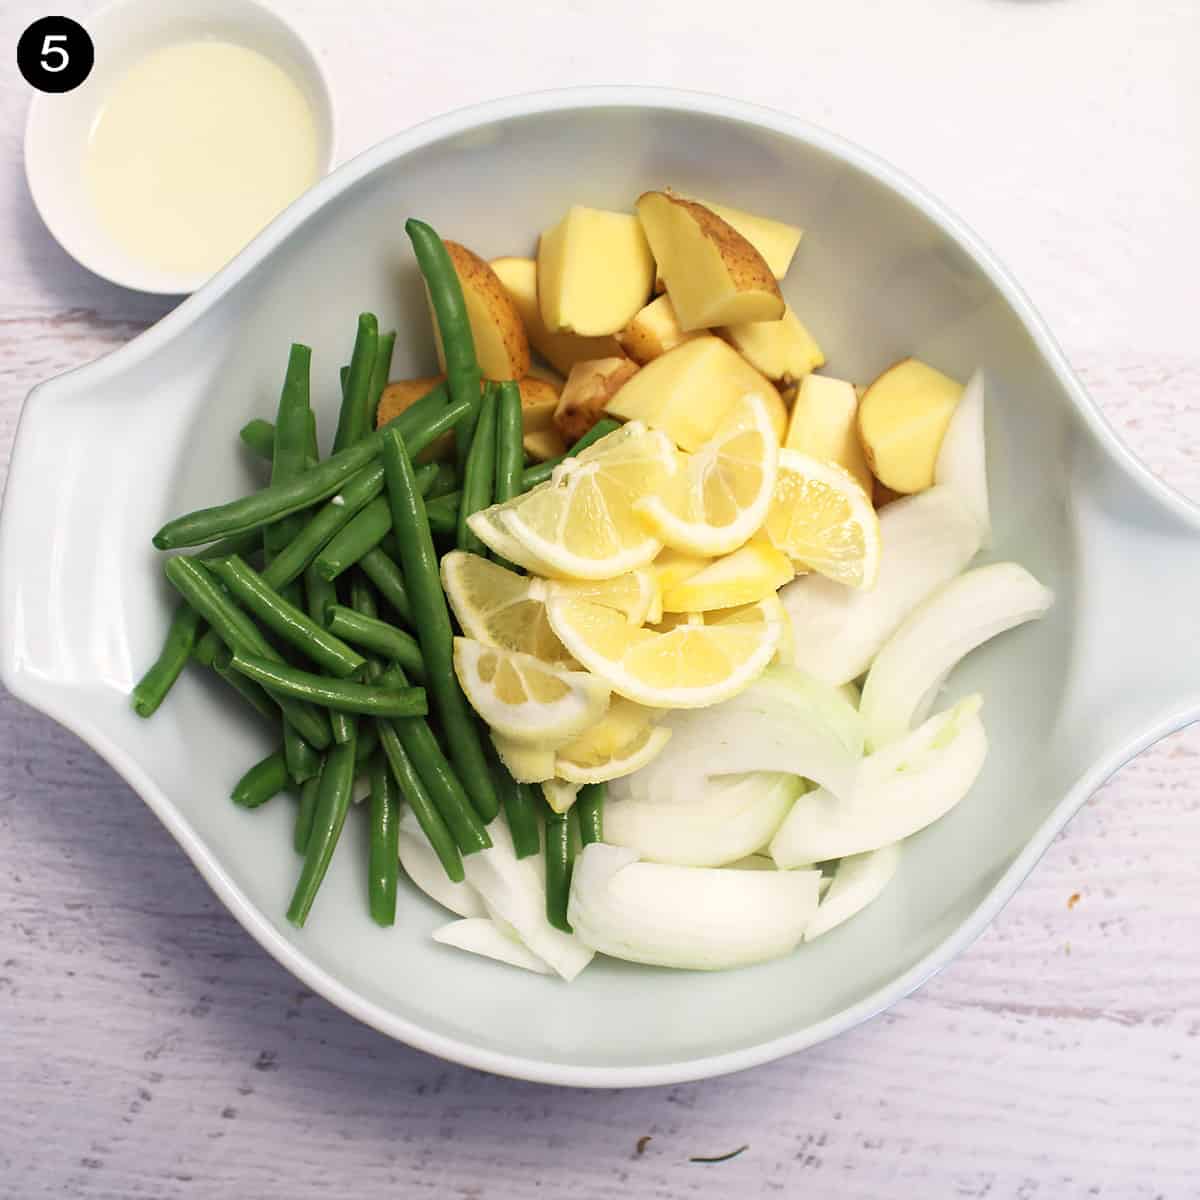 Cut up vegetables, potatoes and lemons in bowl.